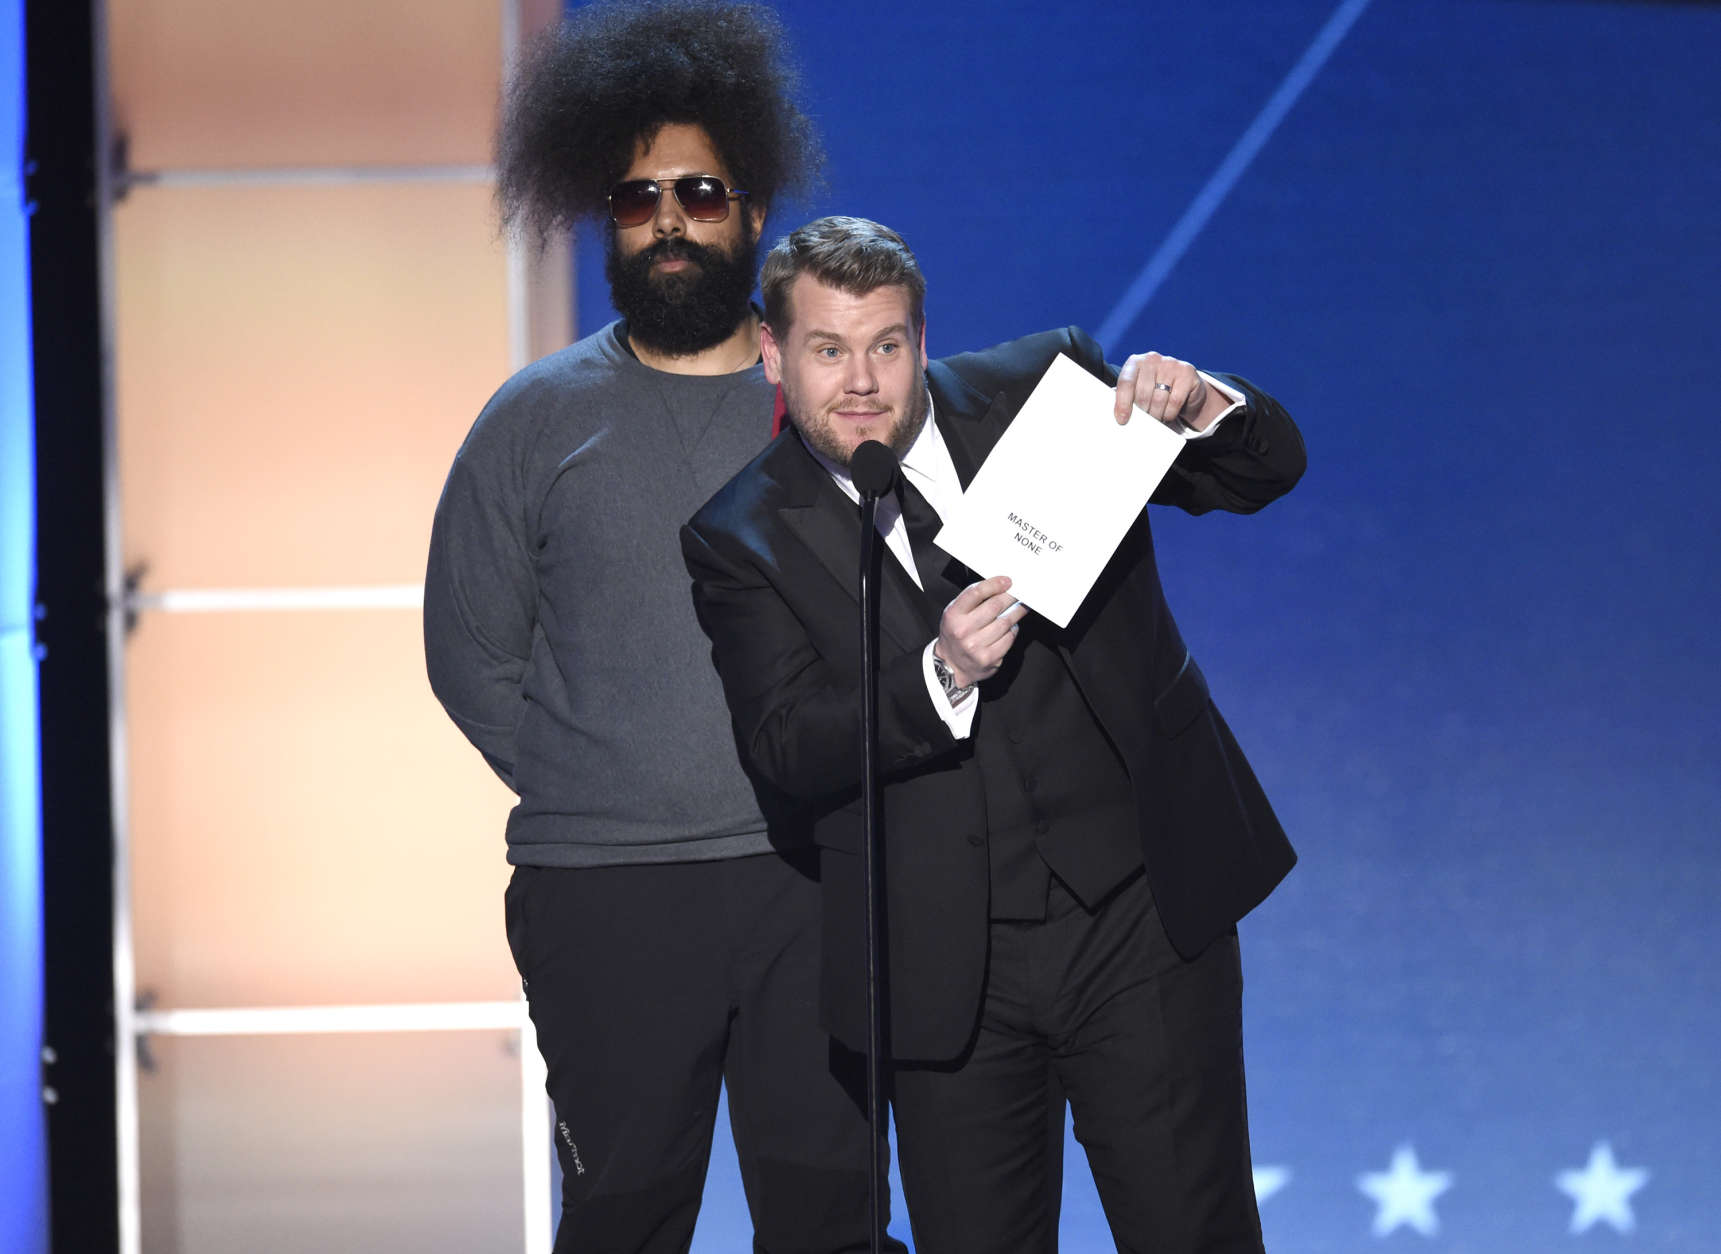 Bandleader Reggie Watts, left, is 45 on March 23. (Photo by Chris Pizzello/Invision/AP)